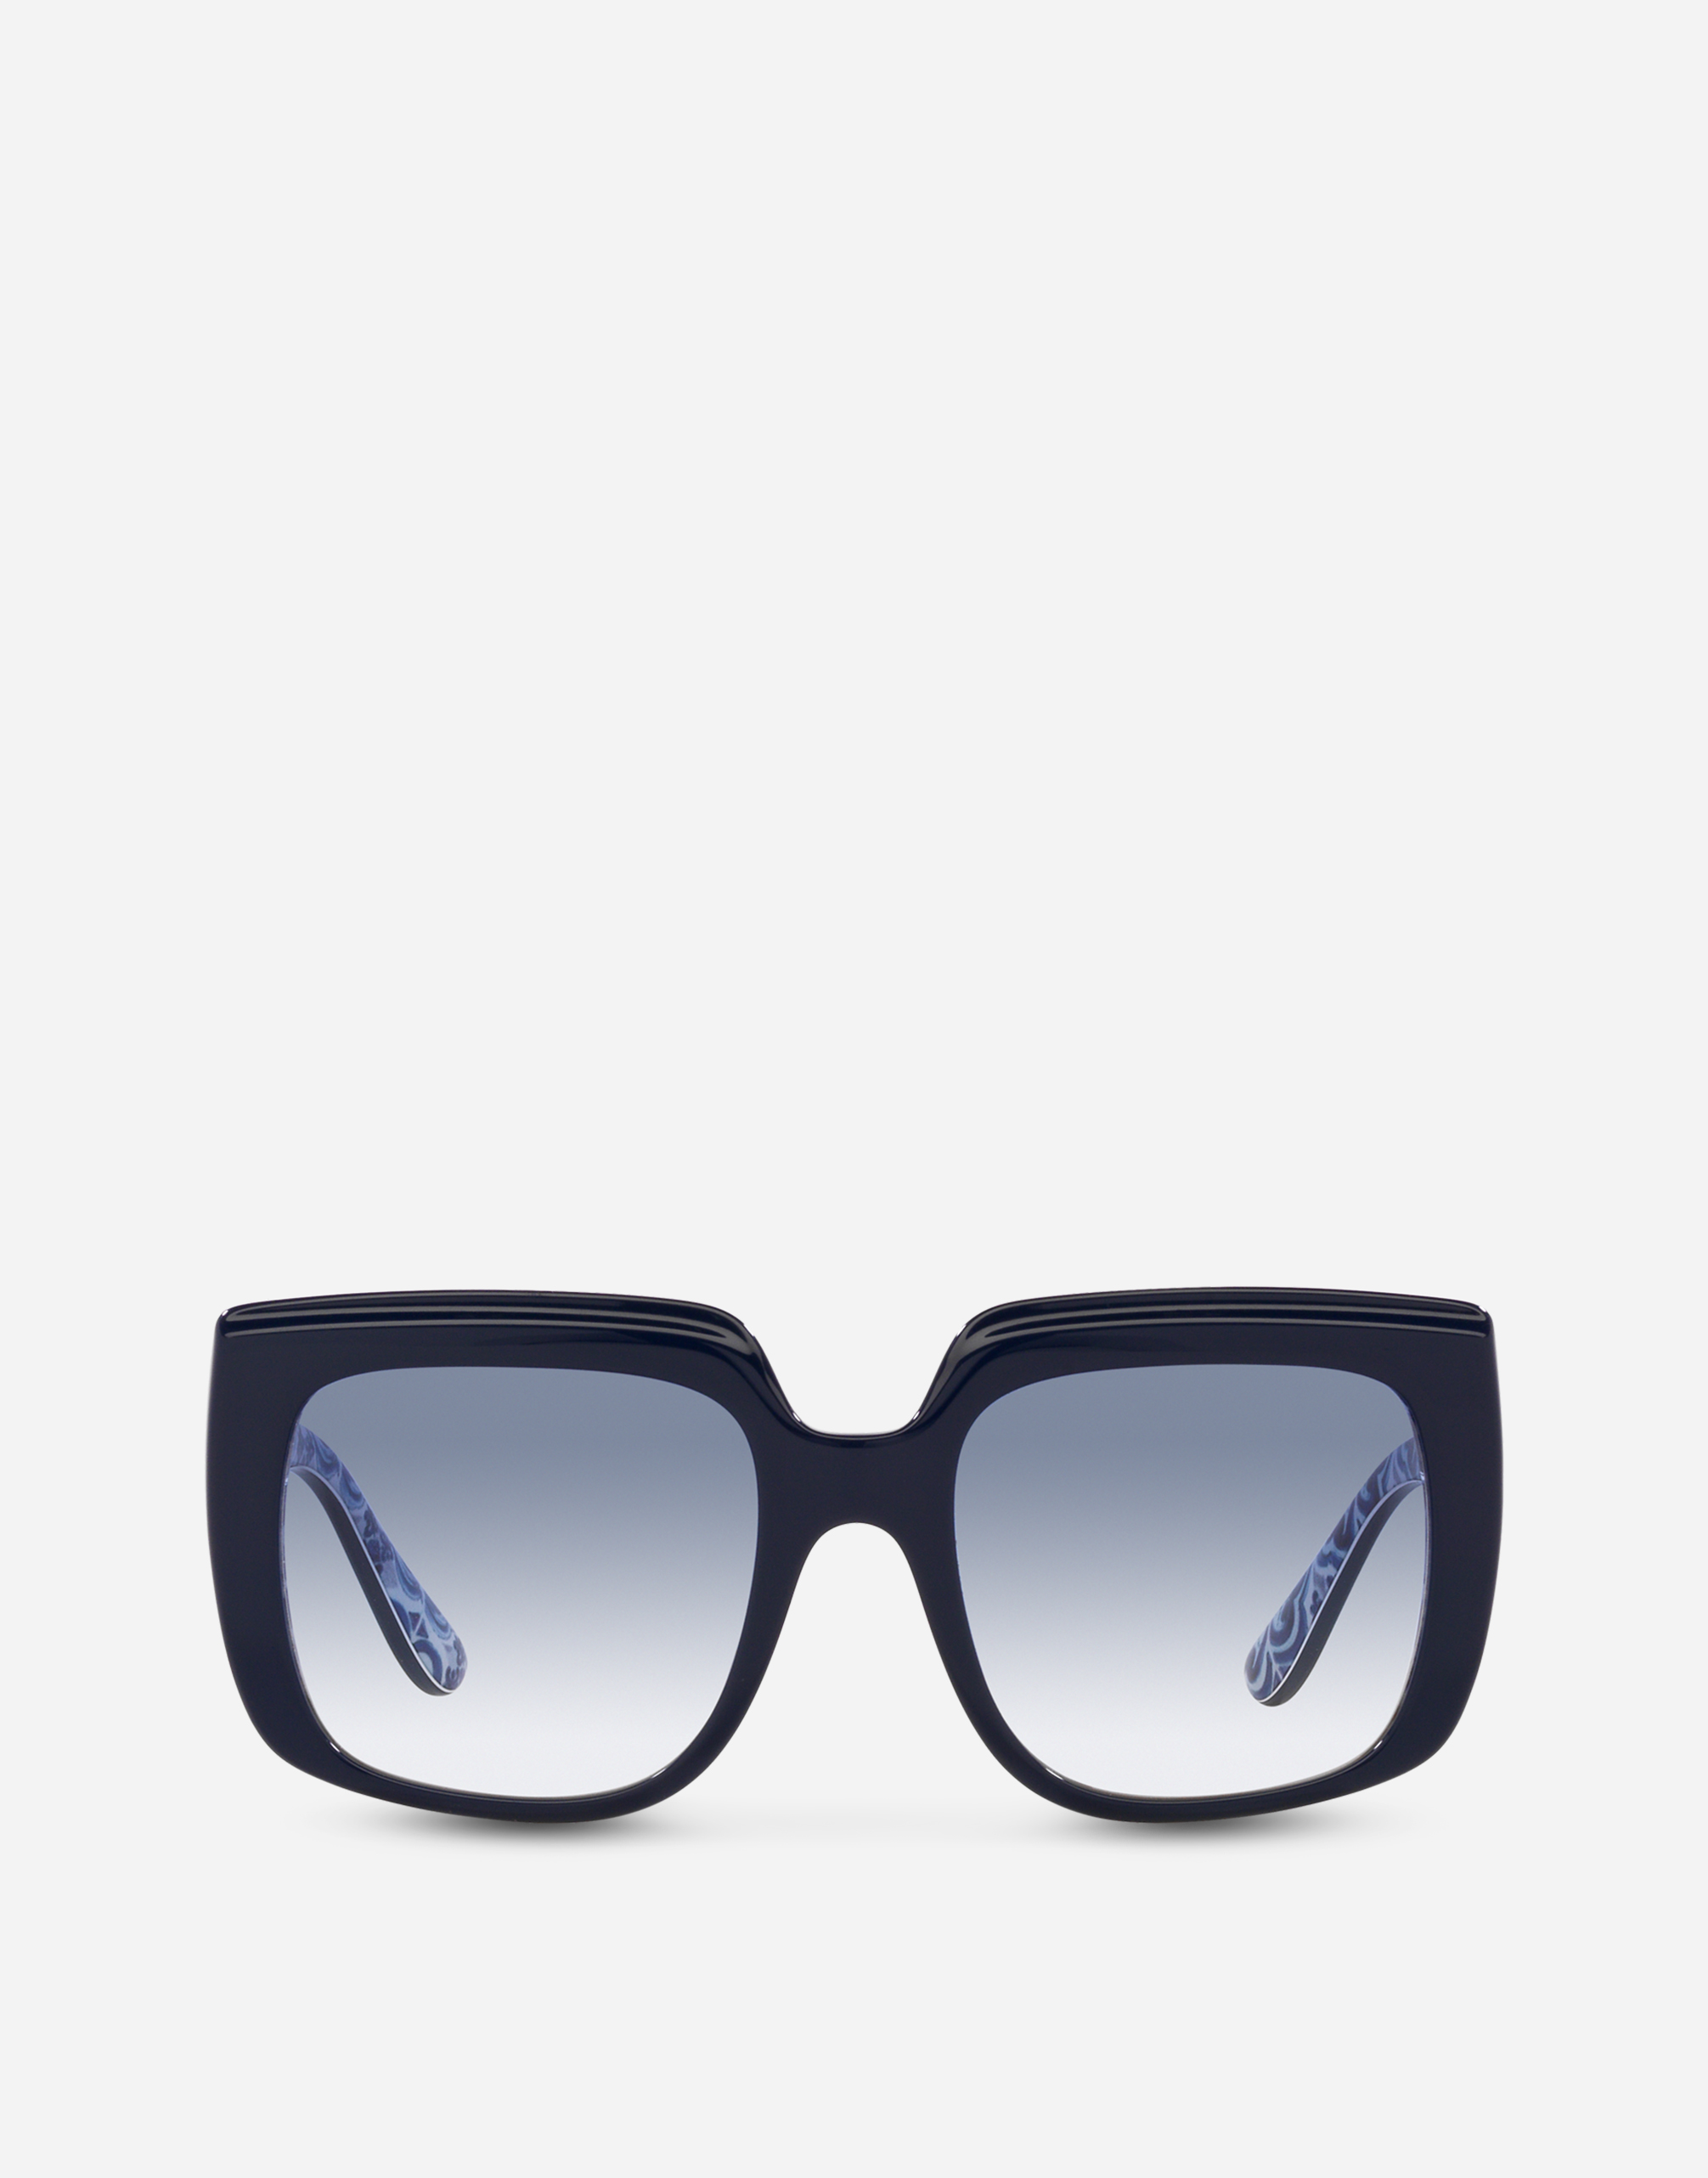 New Print Sunglasses in Blue nevy on maiolica